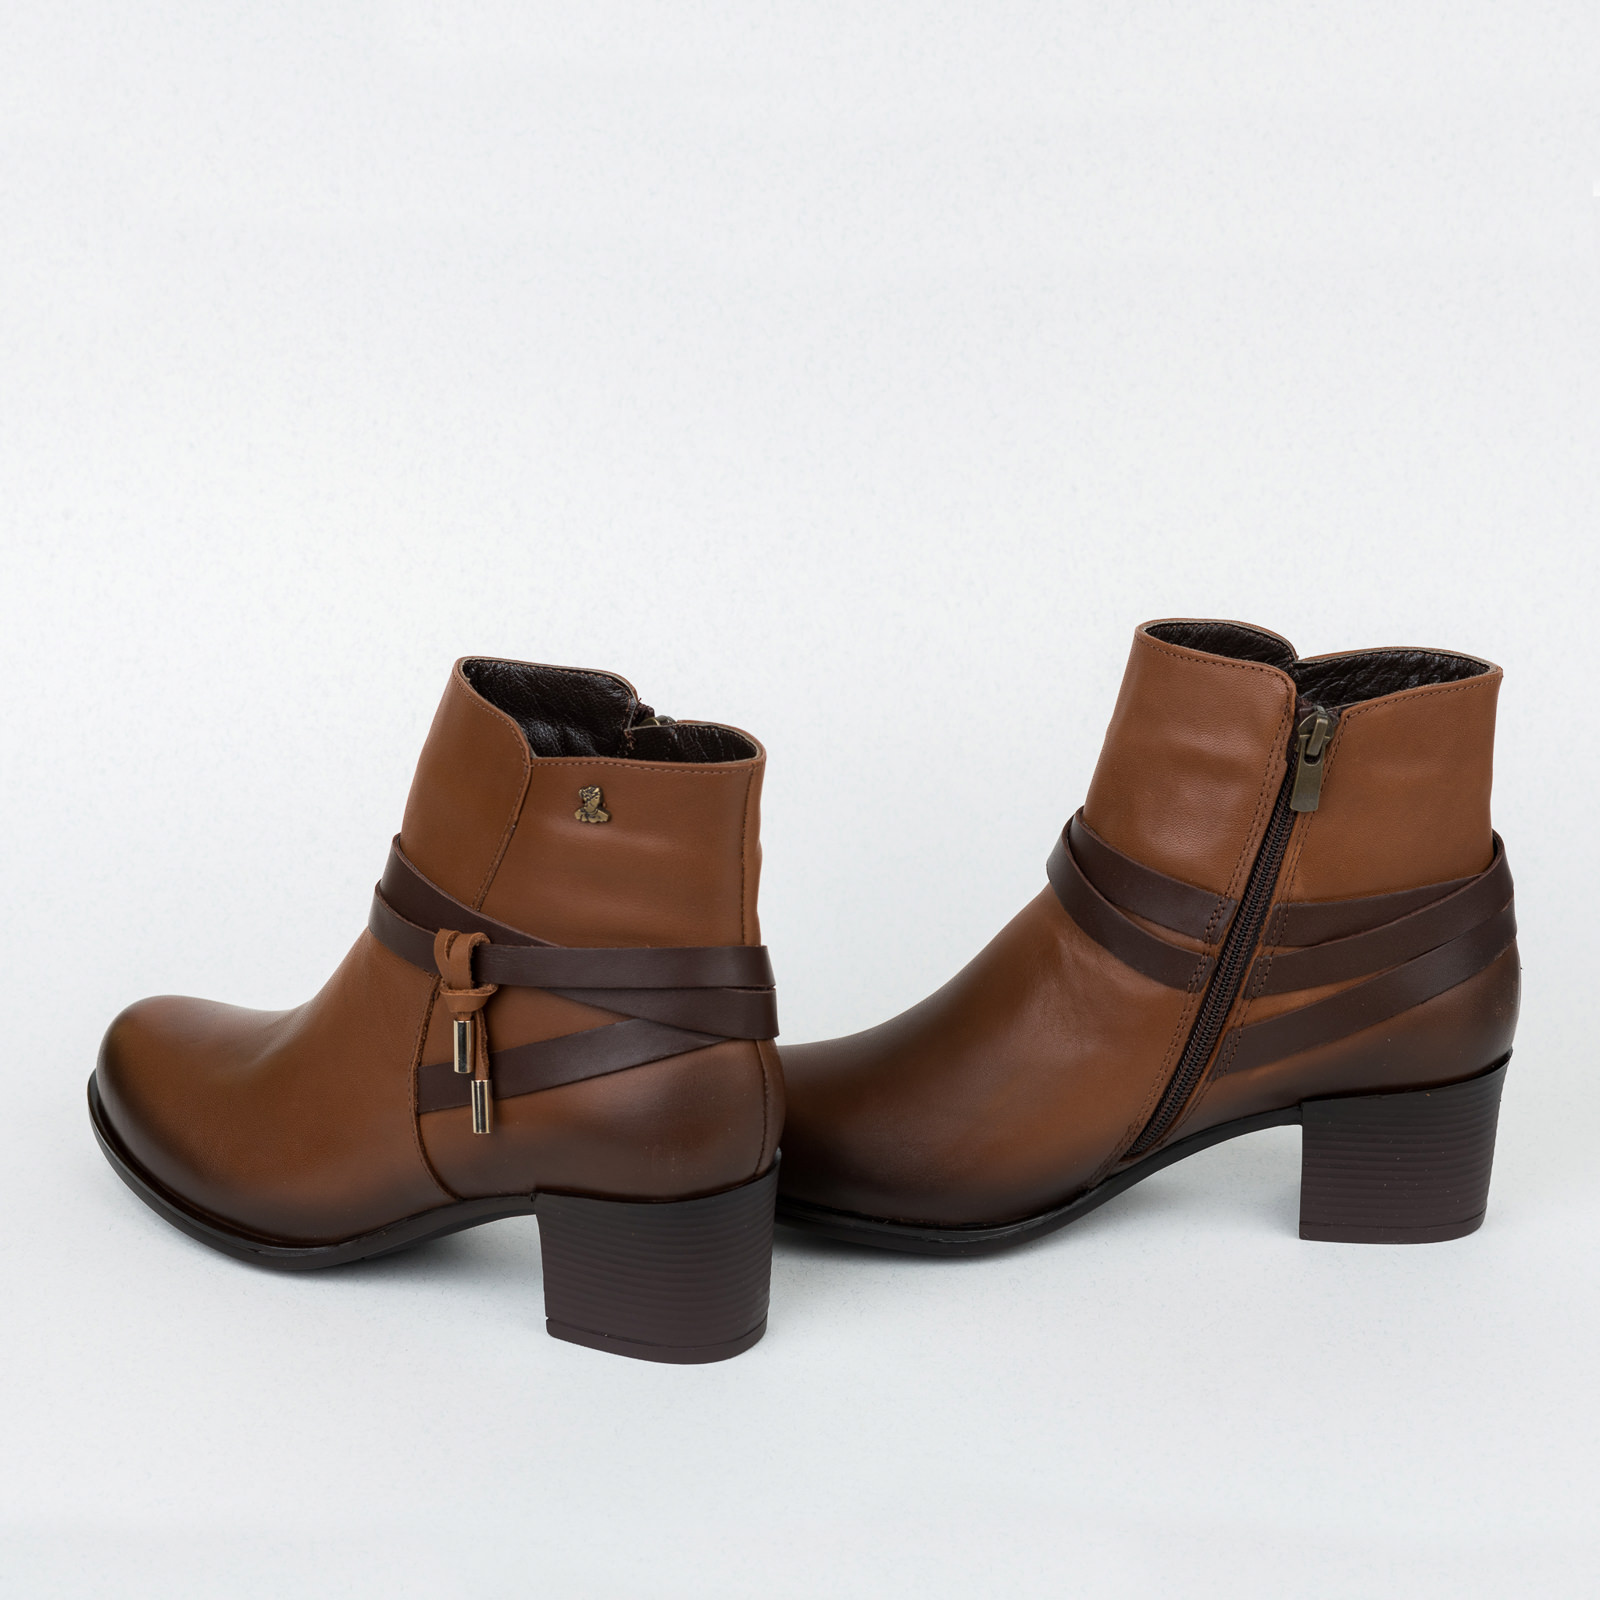 Leather ankle boots B438 - CAMEL